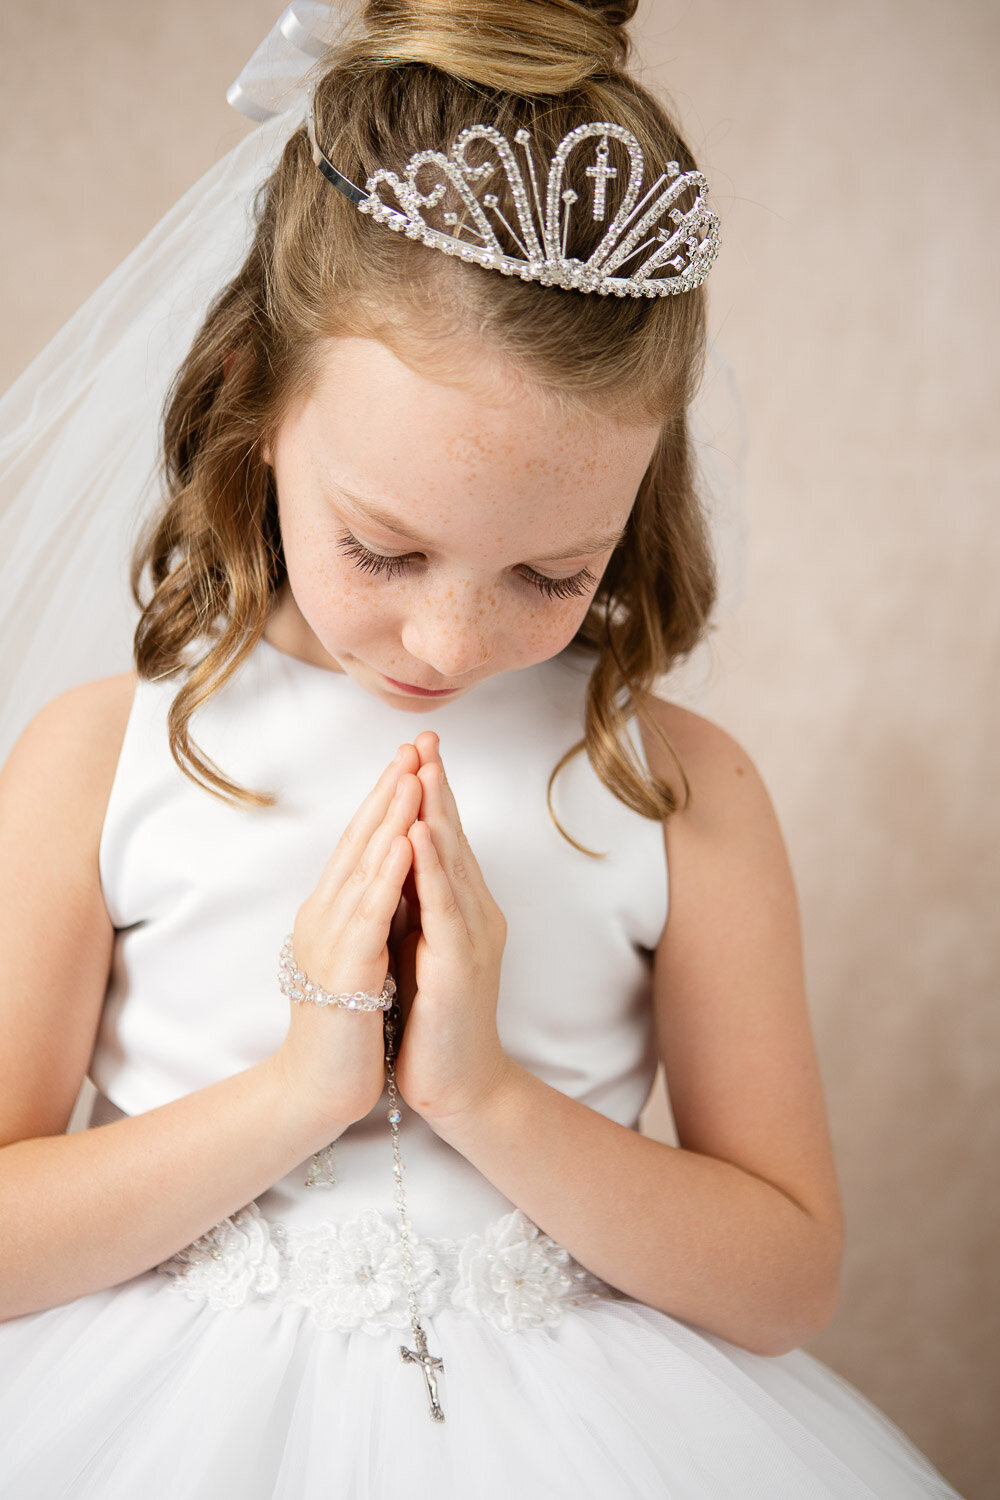 Professional little beauty portrait of girl in white dress and tiara